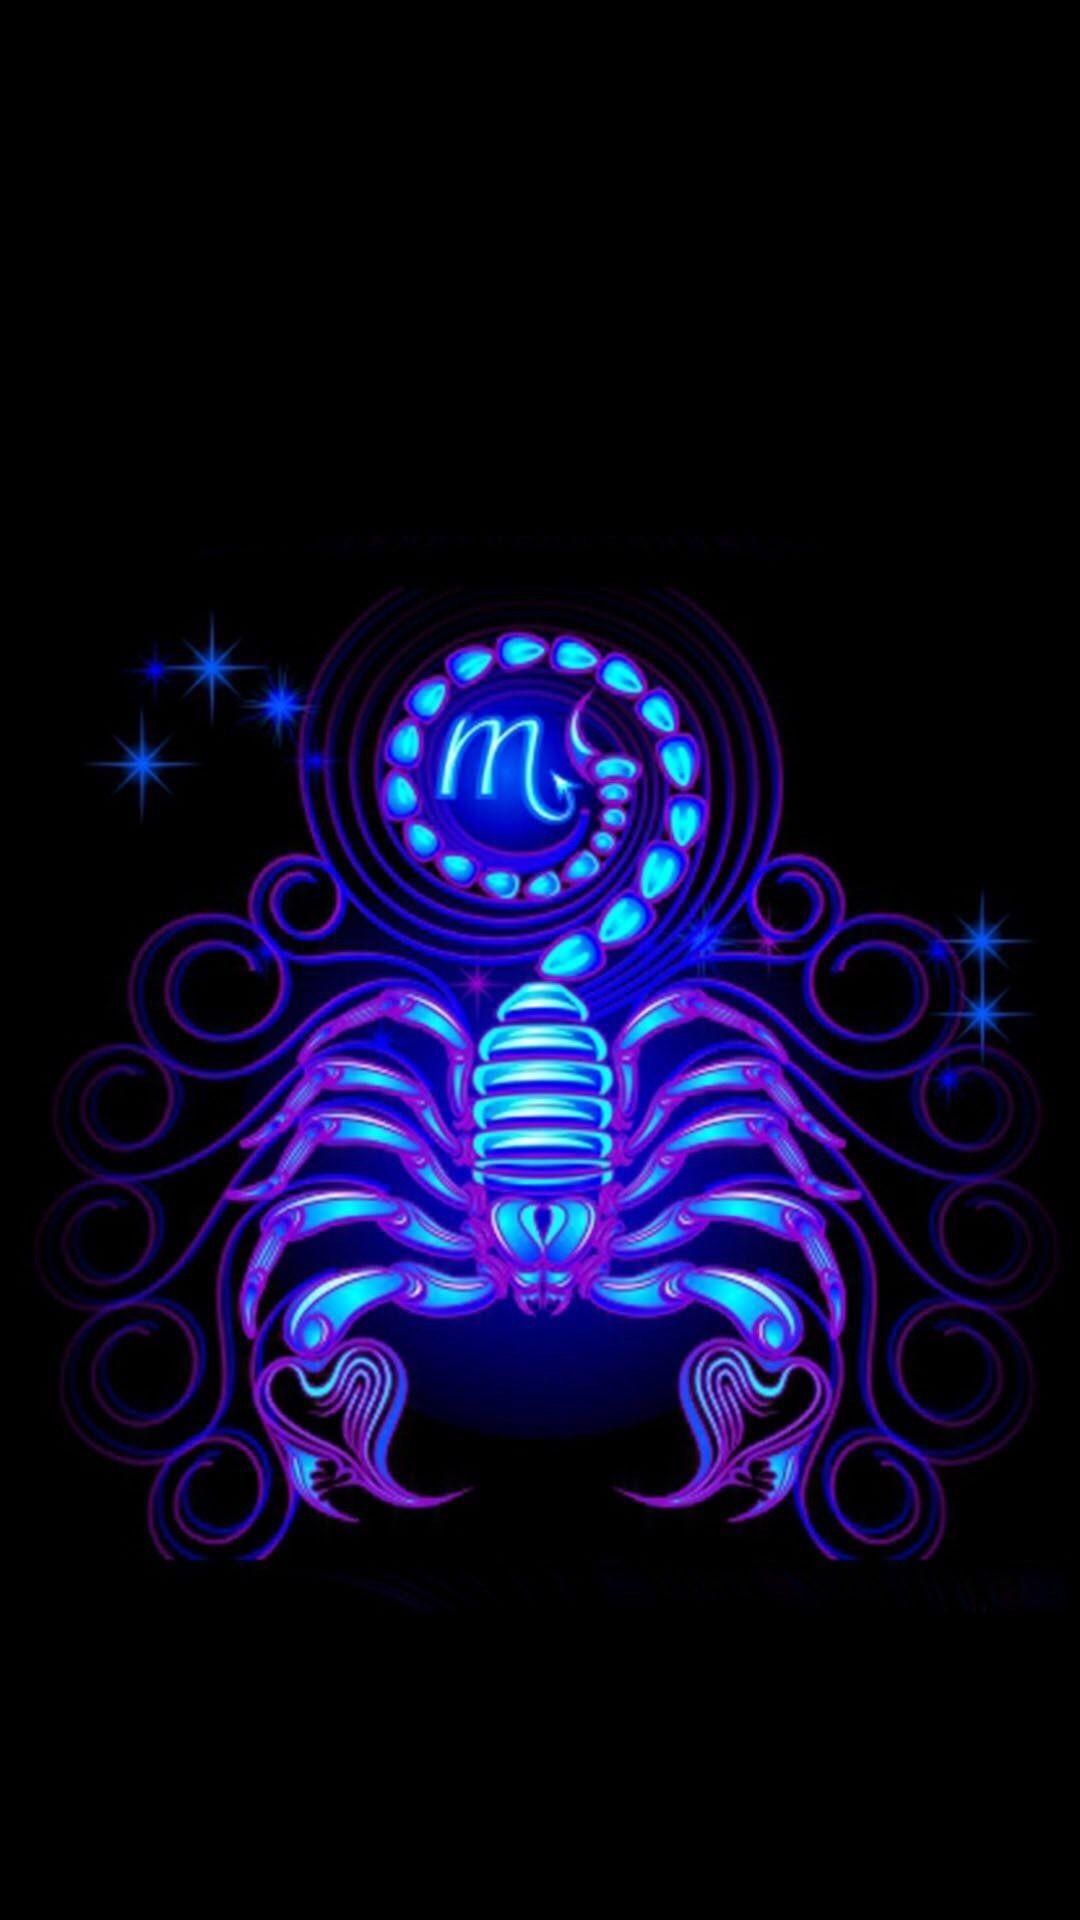 HD Scorpio Wallpaper Explore more Astrological Sign, From October 23 to November Sco. Cute tumblr wallpaper, Illustration art drawing, Pretty wallpaper iphone